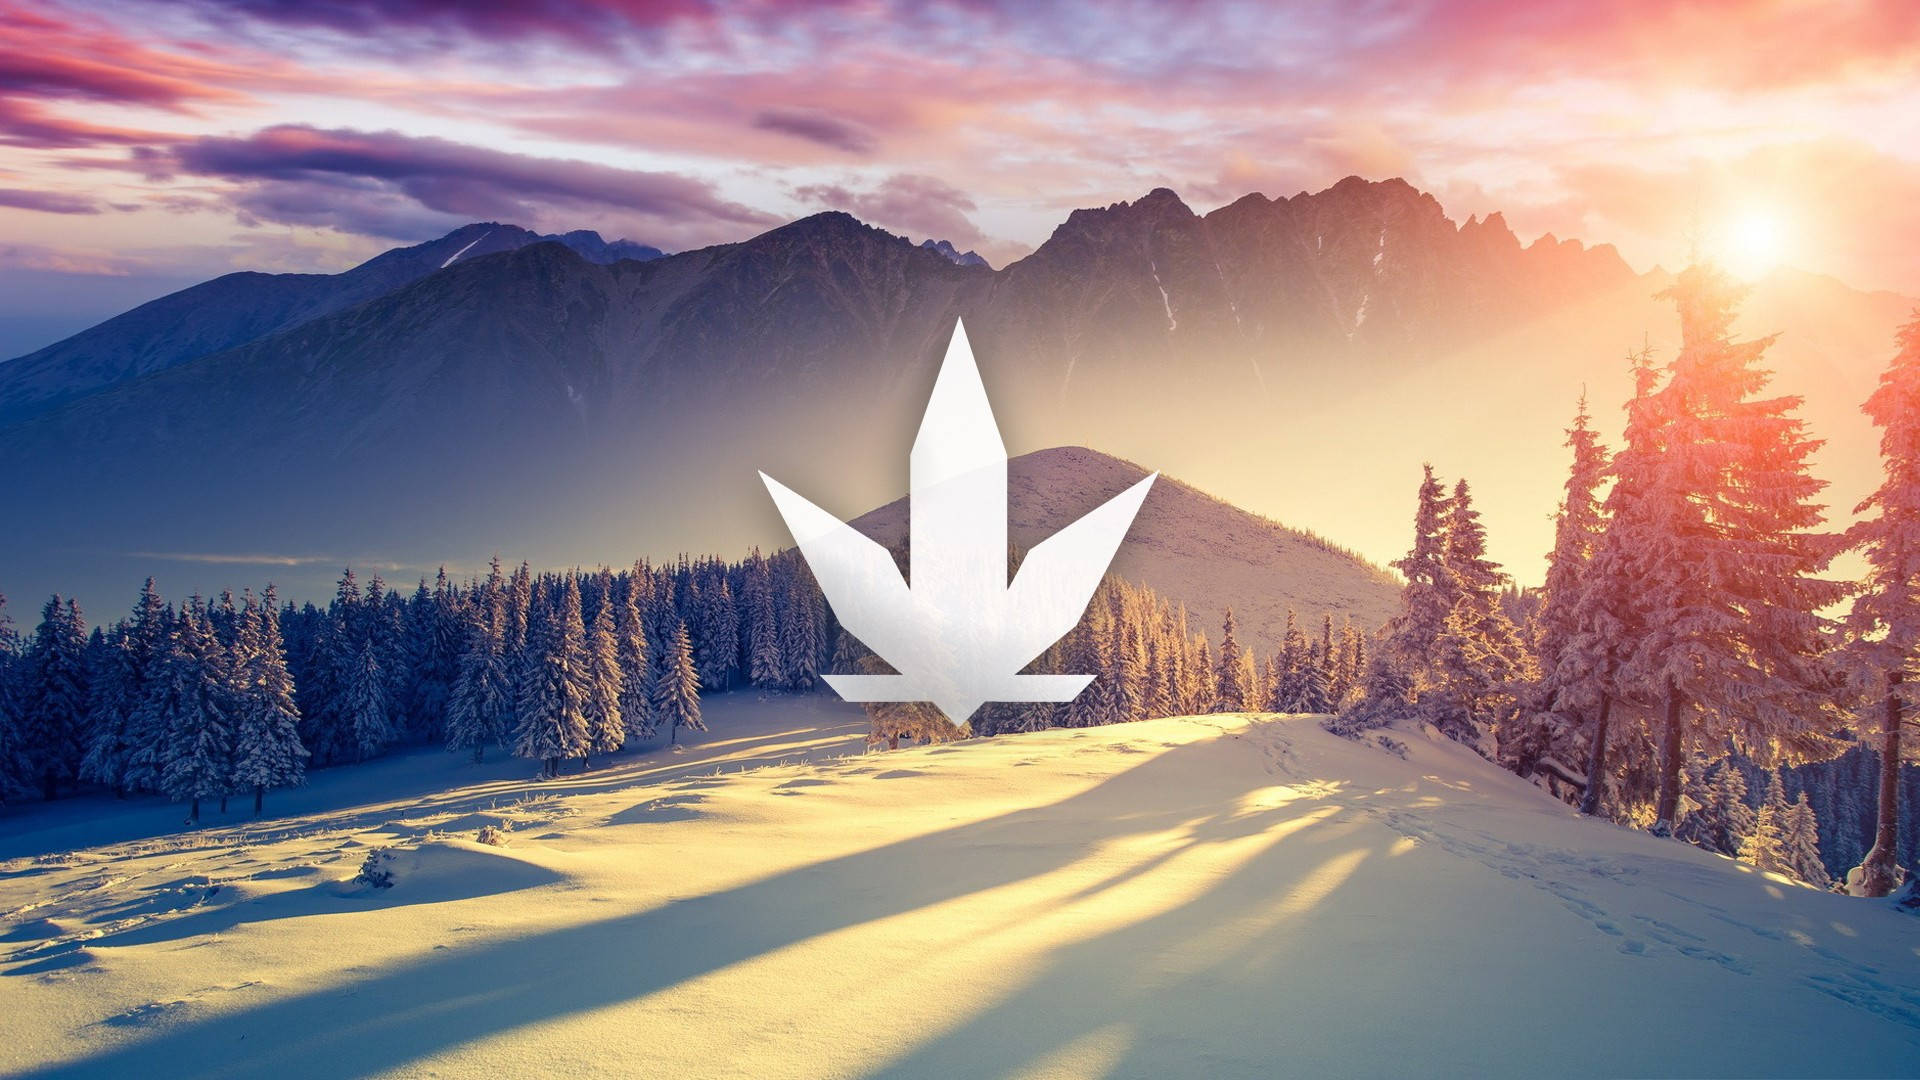 420 Weed On Snowy Landscape Picture